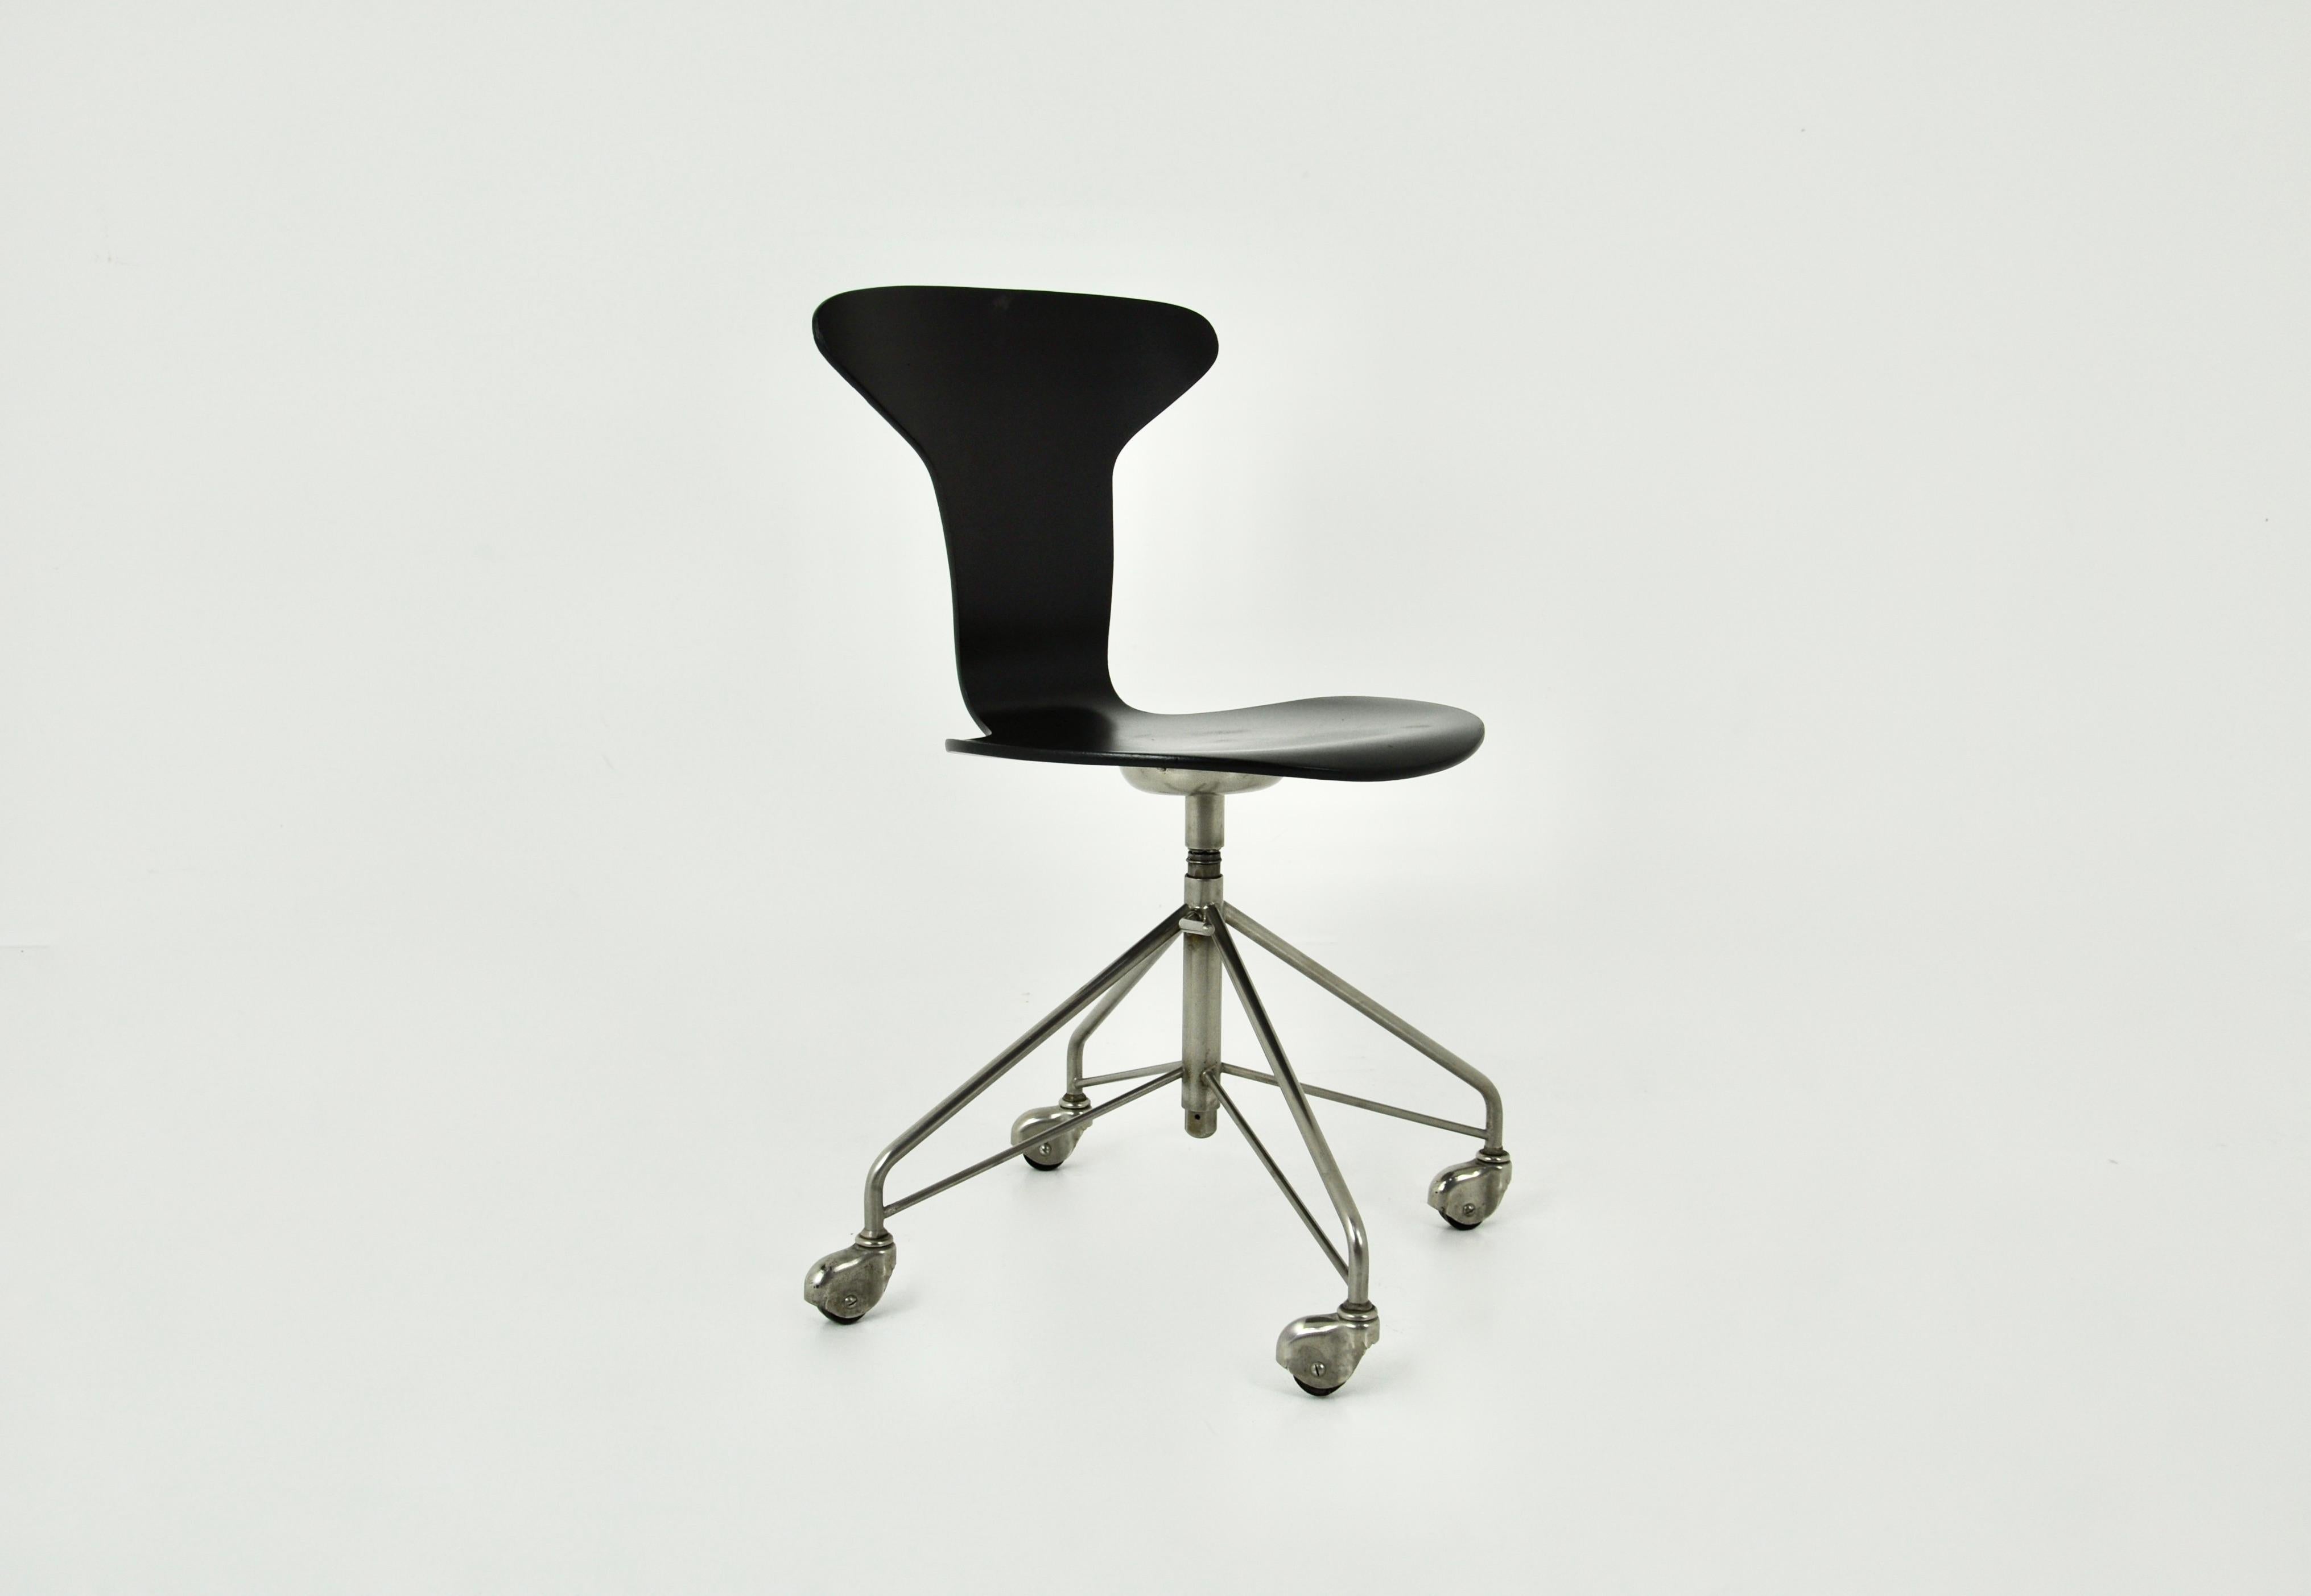 Wood and metal office chair. Rotates on itself and height adjustable. Maximum height: 87 cm, maximum seat height: 55 cm. Stamped on the underside. Wear due to time and age of the chair.